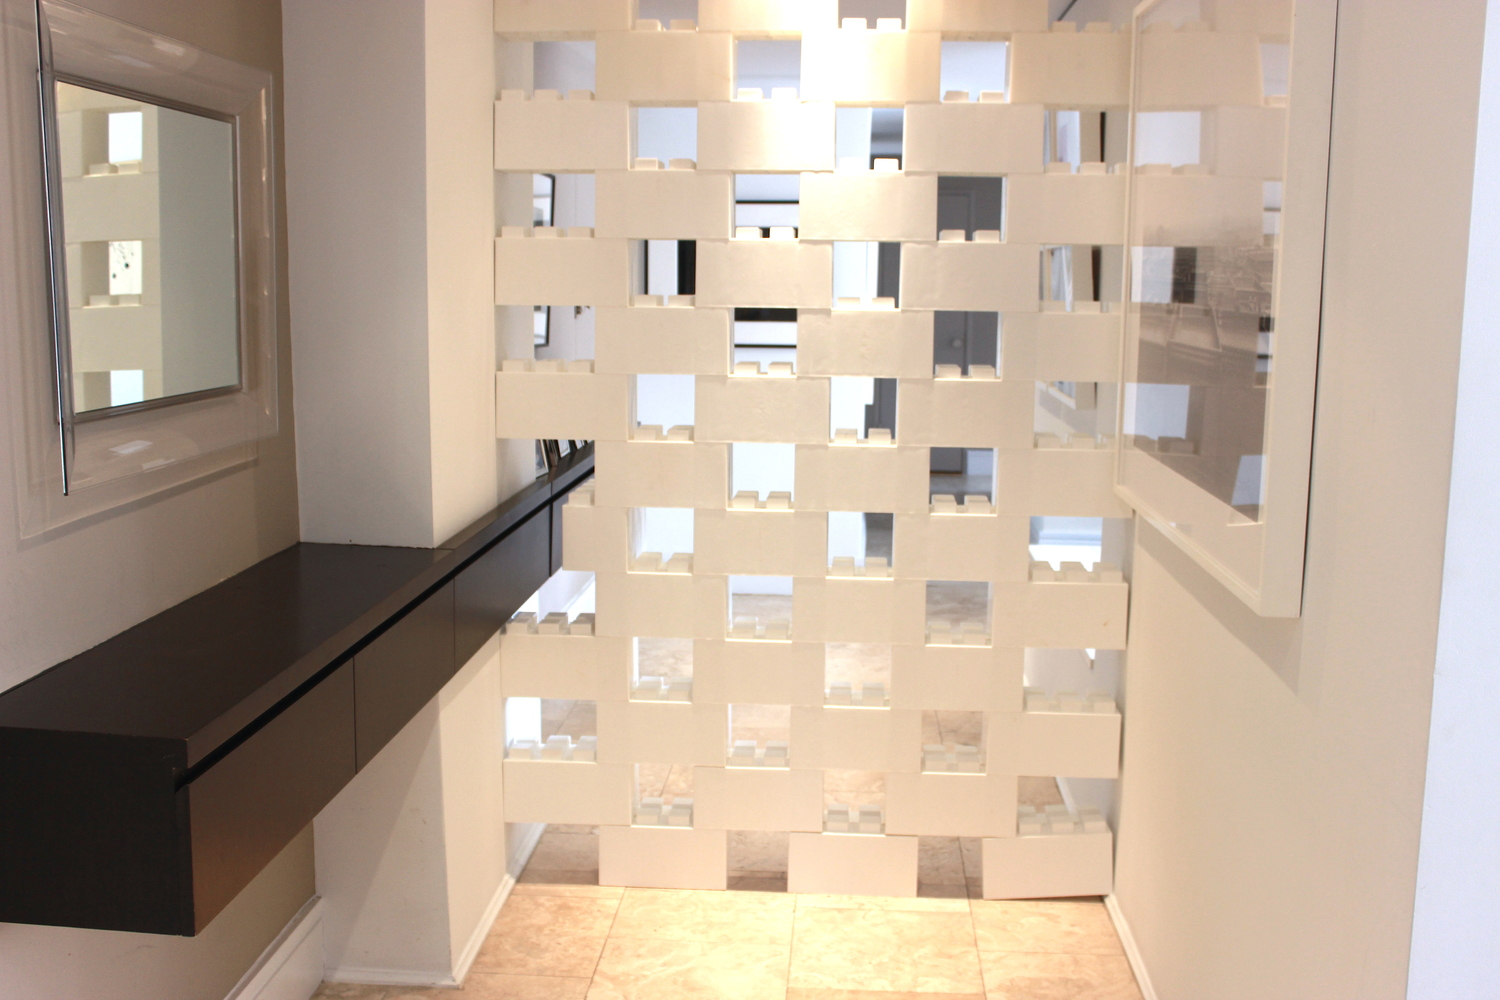 A white divider wall made of staggered EverBlocks, which are basically life-size LEGOs.